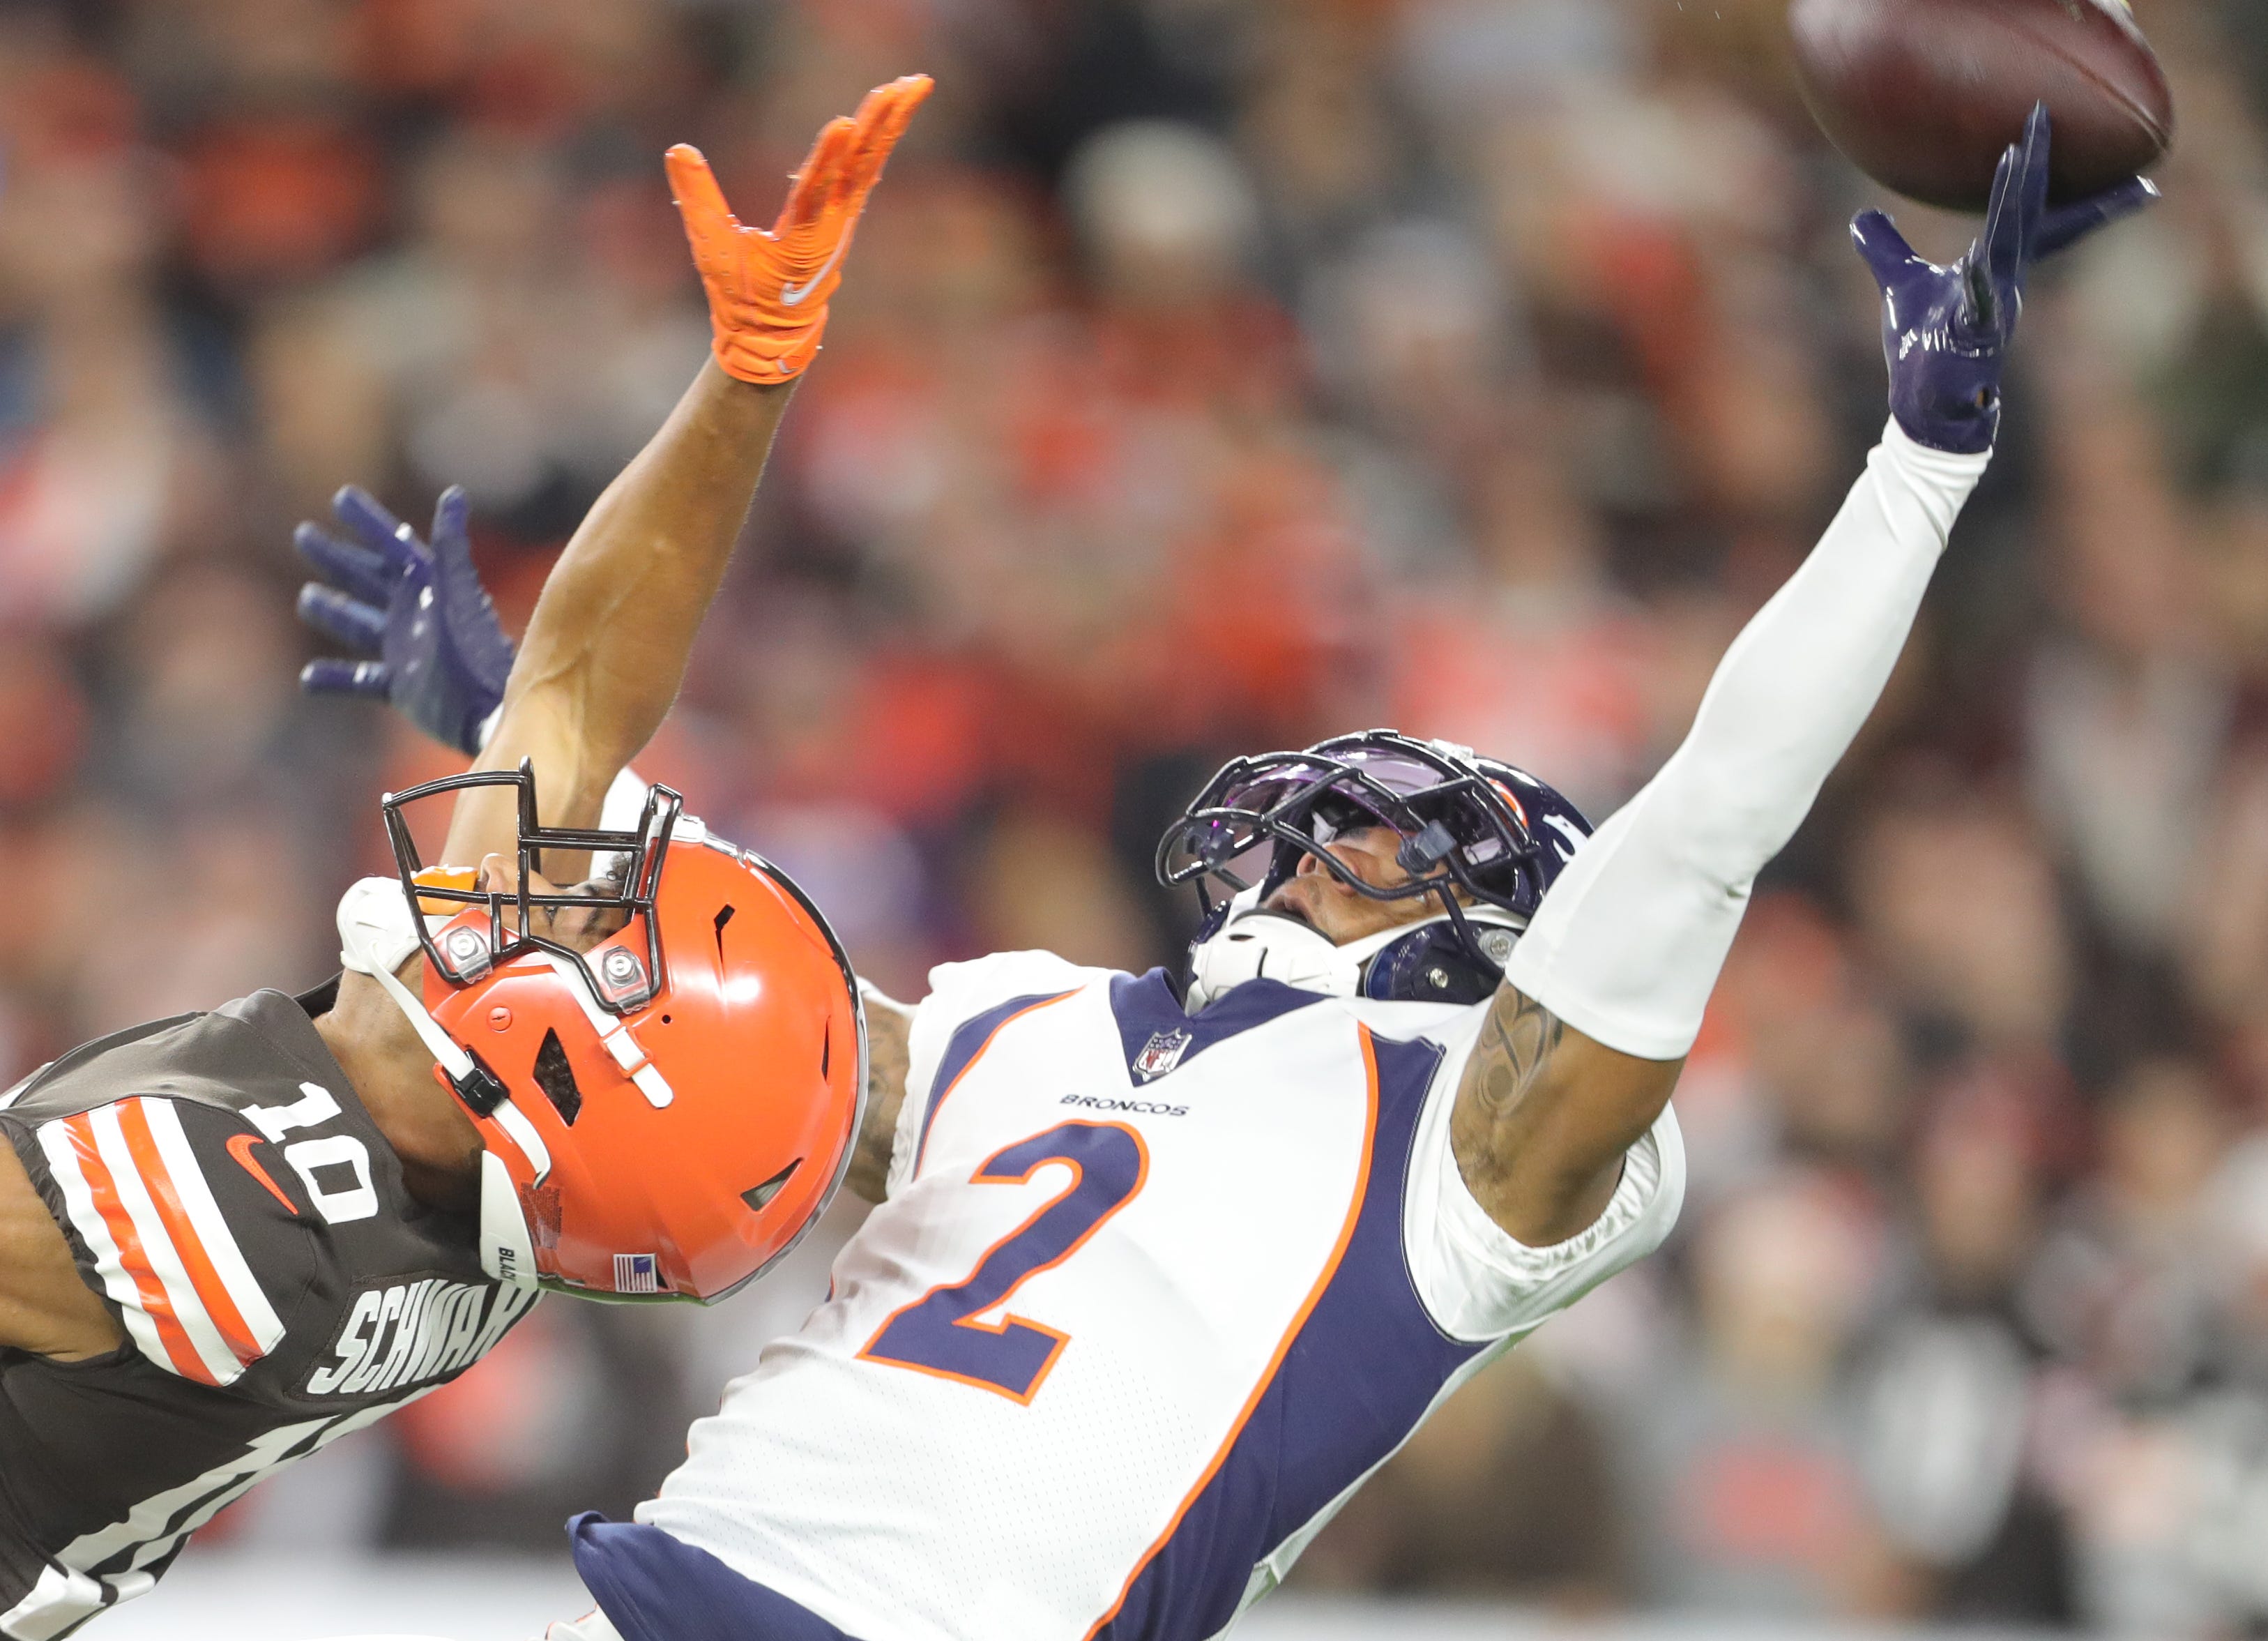 Cleveland Browns' Anthony Schwartz can't get to a deep ball as Denver Broncos' Par Surtain II defends on Thursday, Oct. 21, 2021 in Cleveland, Ohio, at FirstEnergy Stadium.